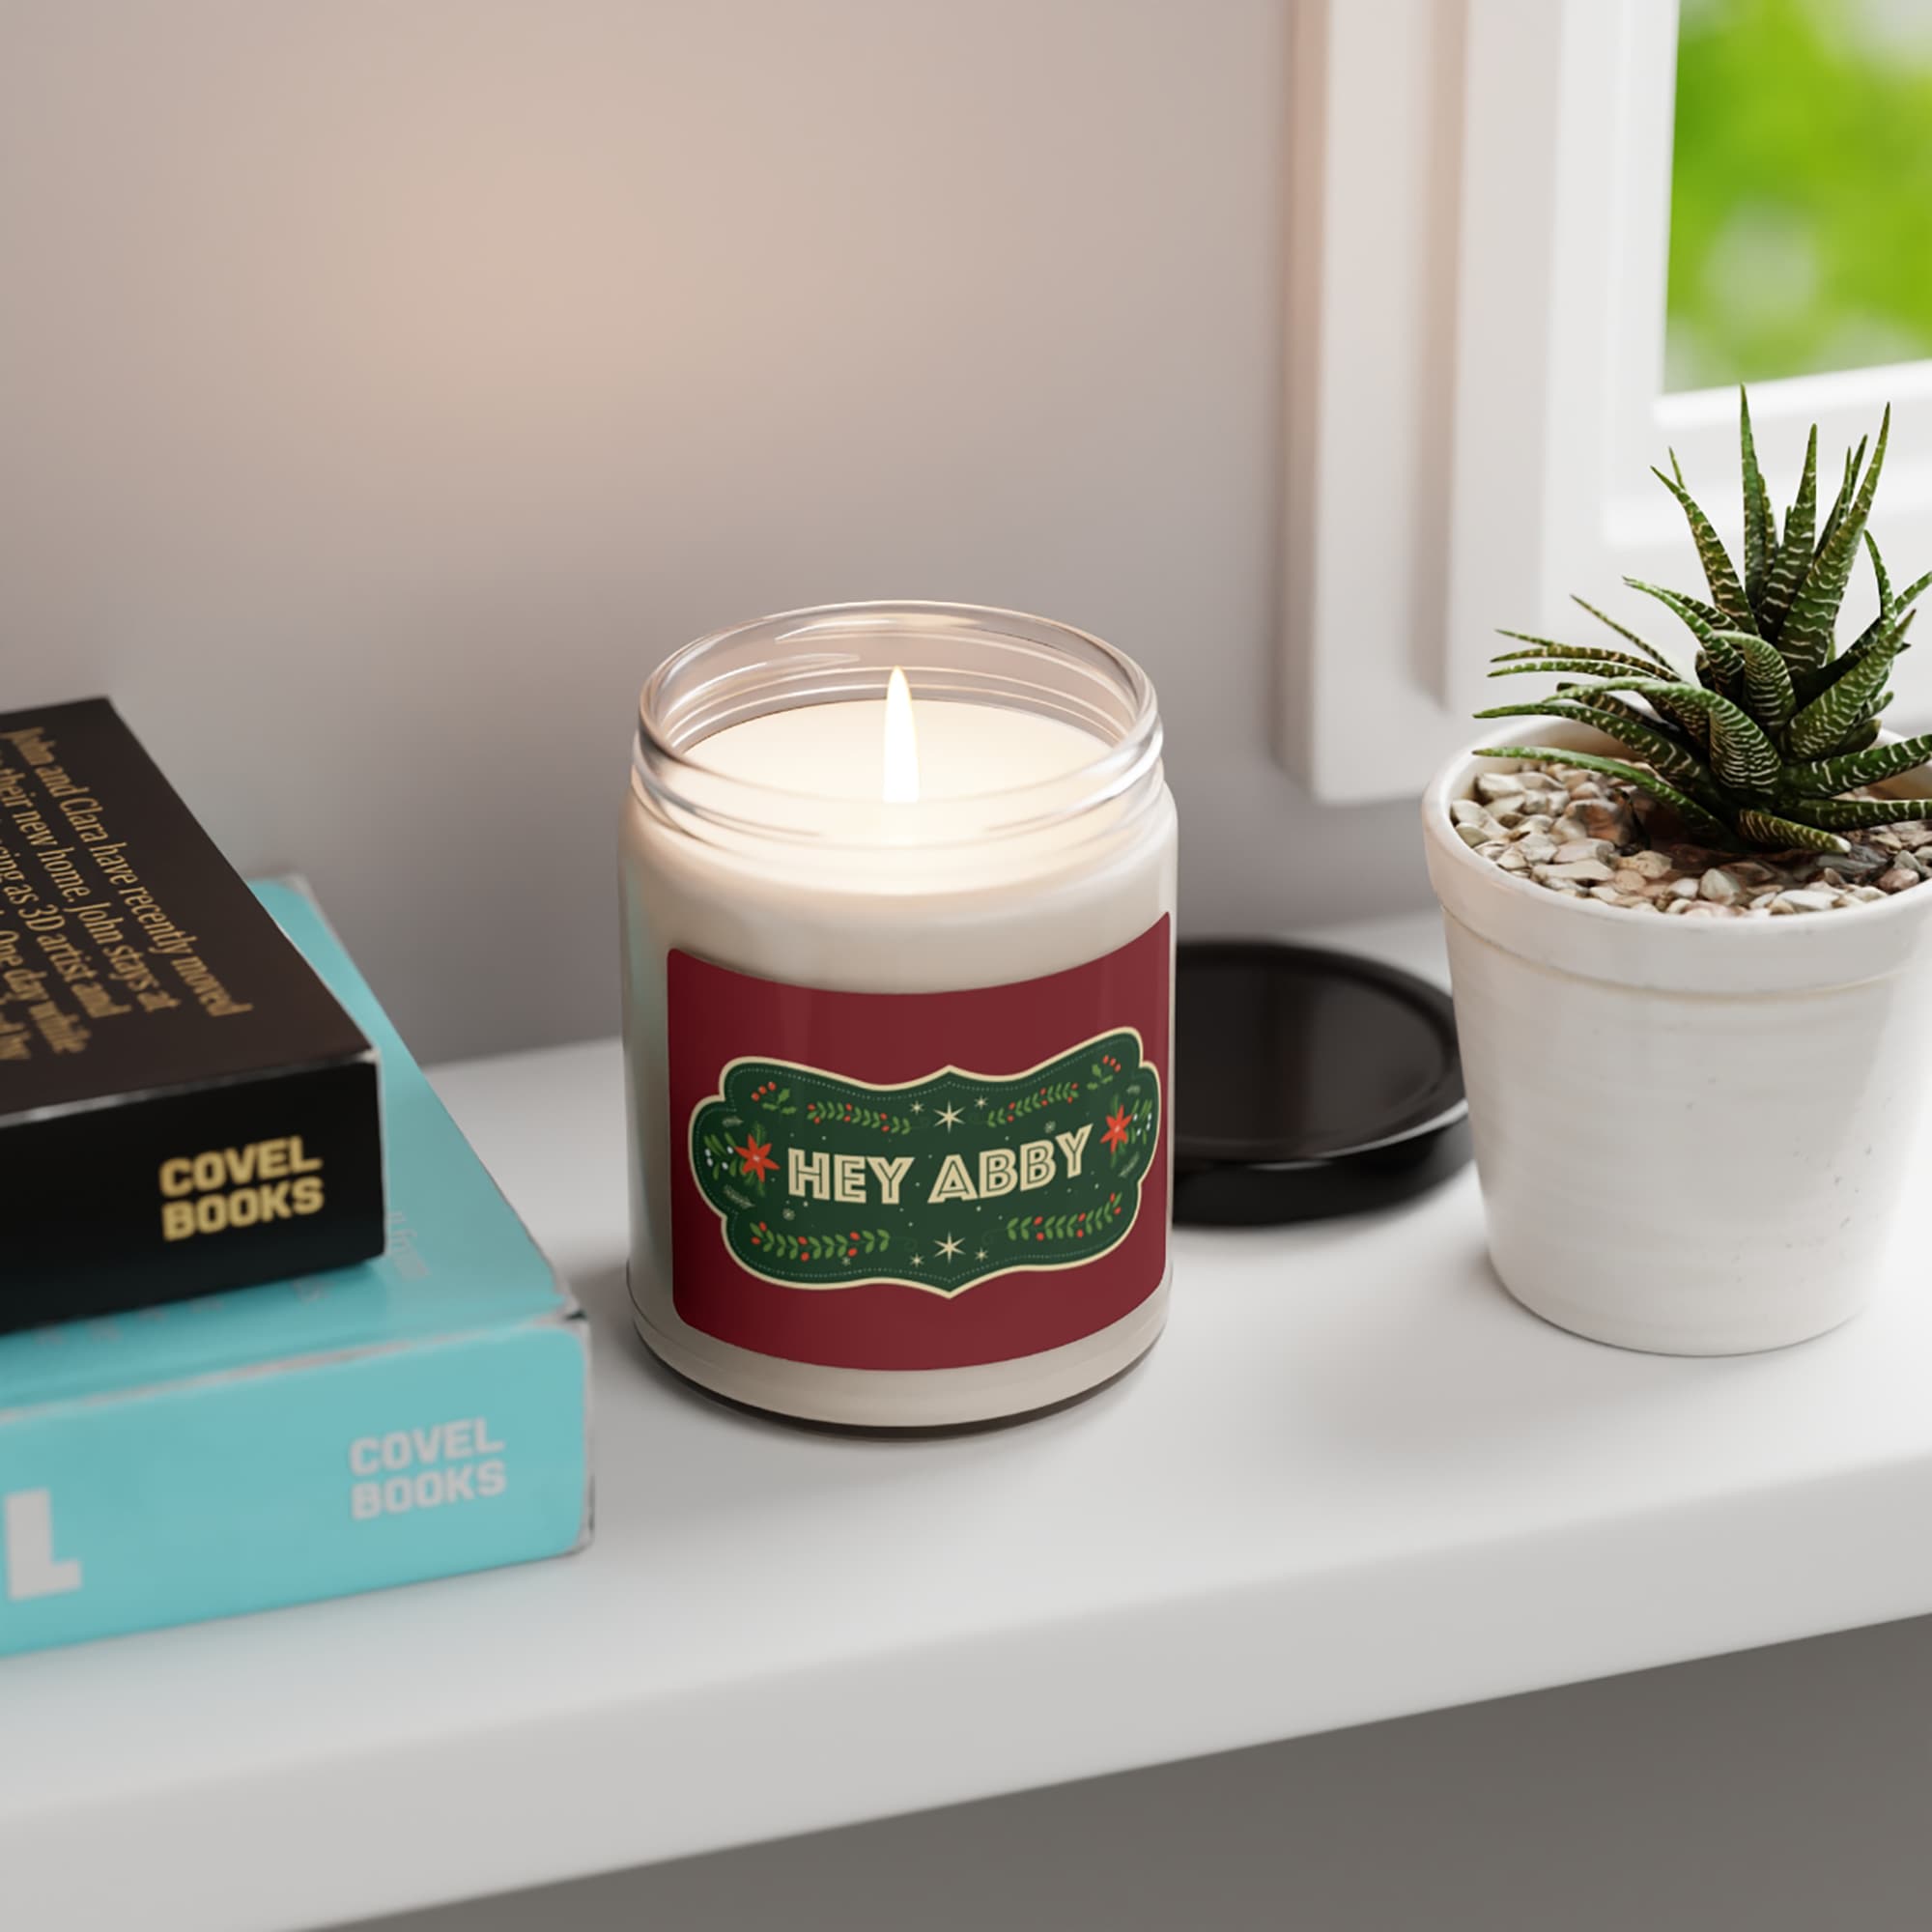 Hey abby's best scented candle